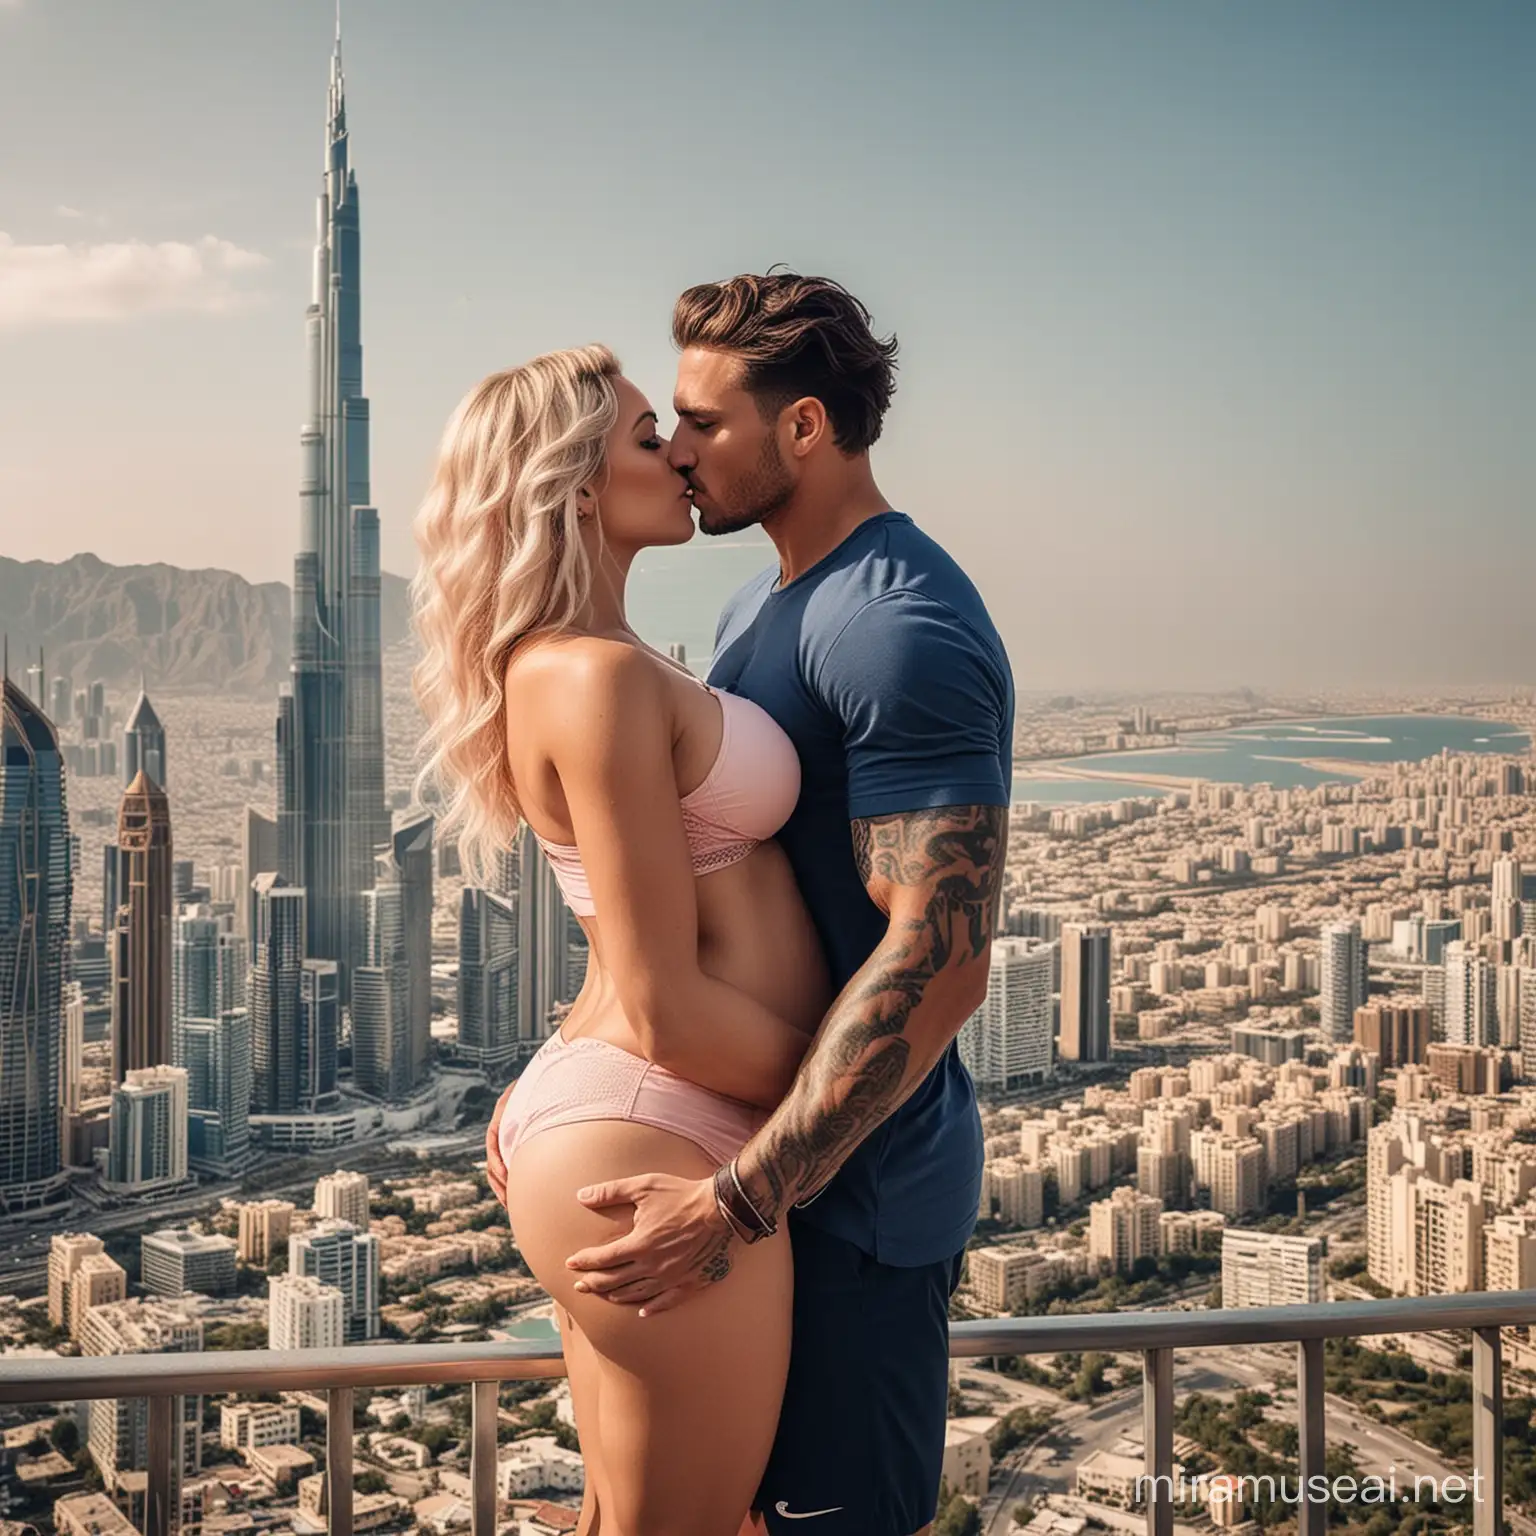 Talented Footballer Embracing His Royal Pregnant Wife in Luxurious Villa Overlooking Sea and Skyscraper